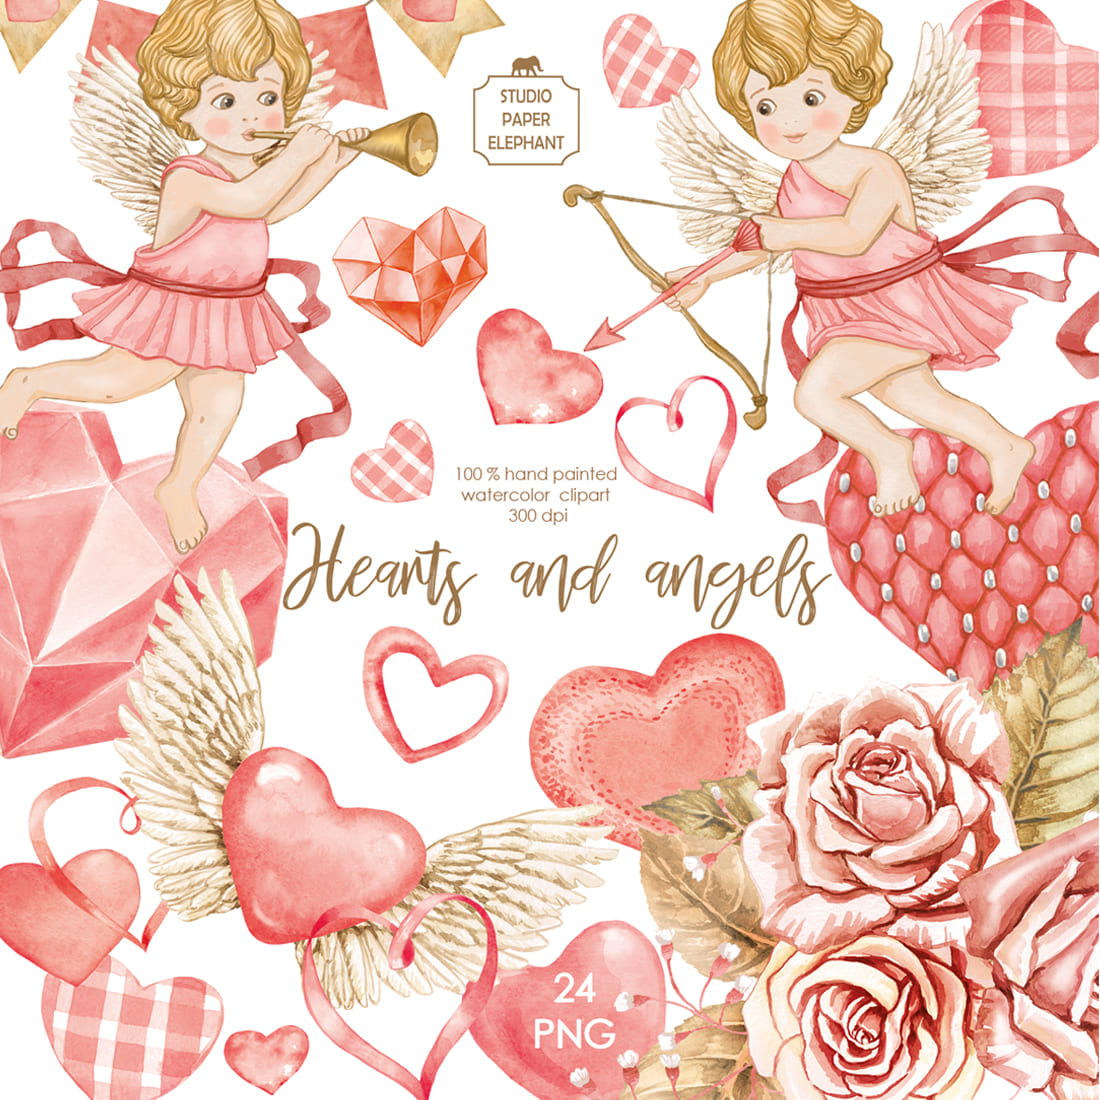 Watercolor Hearts and Angels Valentine's Day Clip art Valentine's Day Clipart Valentine's Day Postcard DIY Scrapbooking pinterest preview image.